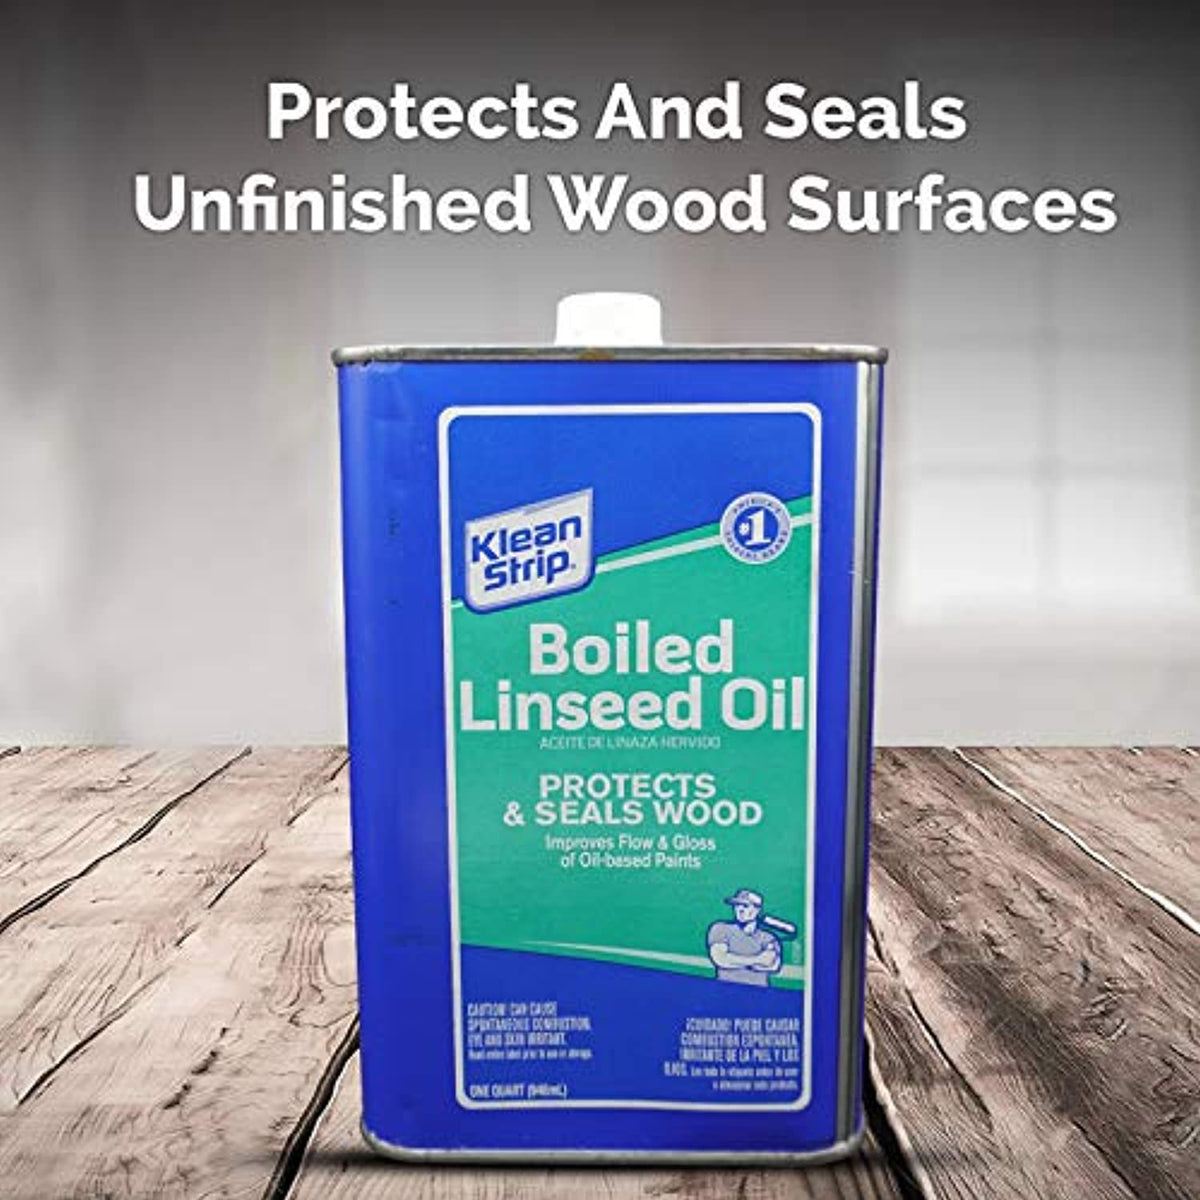 Klean Strip Boiled Linseed Oil 1 Quart with Centaurus AZ Paintbrush  Protects Seals Unfinished Wood Produce Beautiful Finish Waterproof Wood  Improves